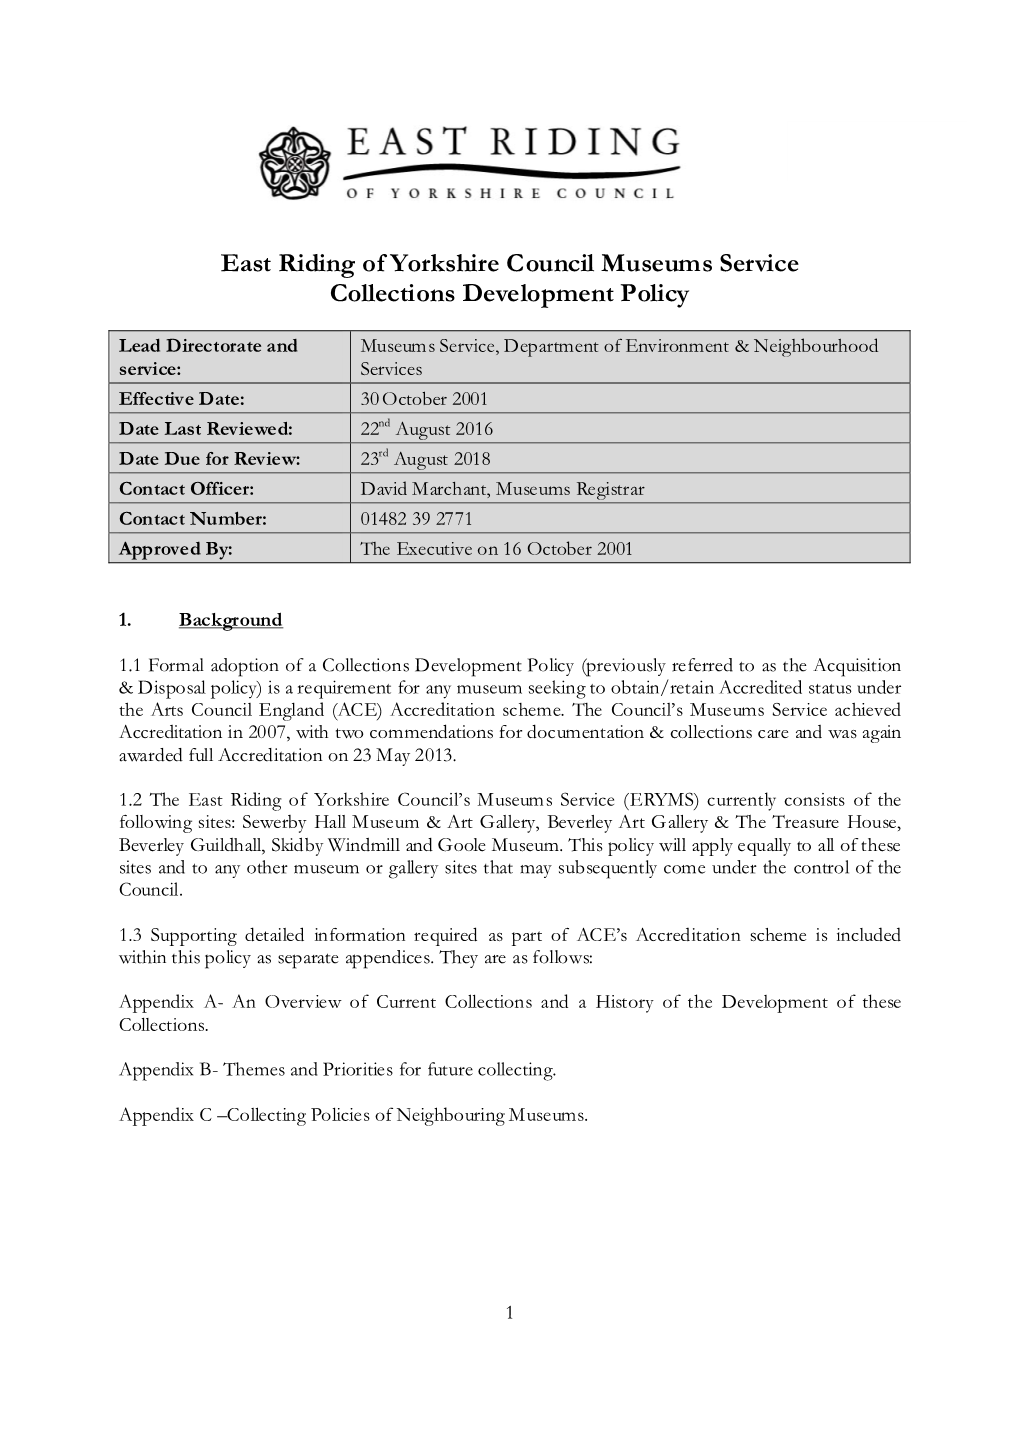 East Riding of Yorkshire Council Museums Service Collections Development Policy